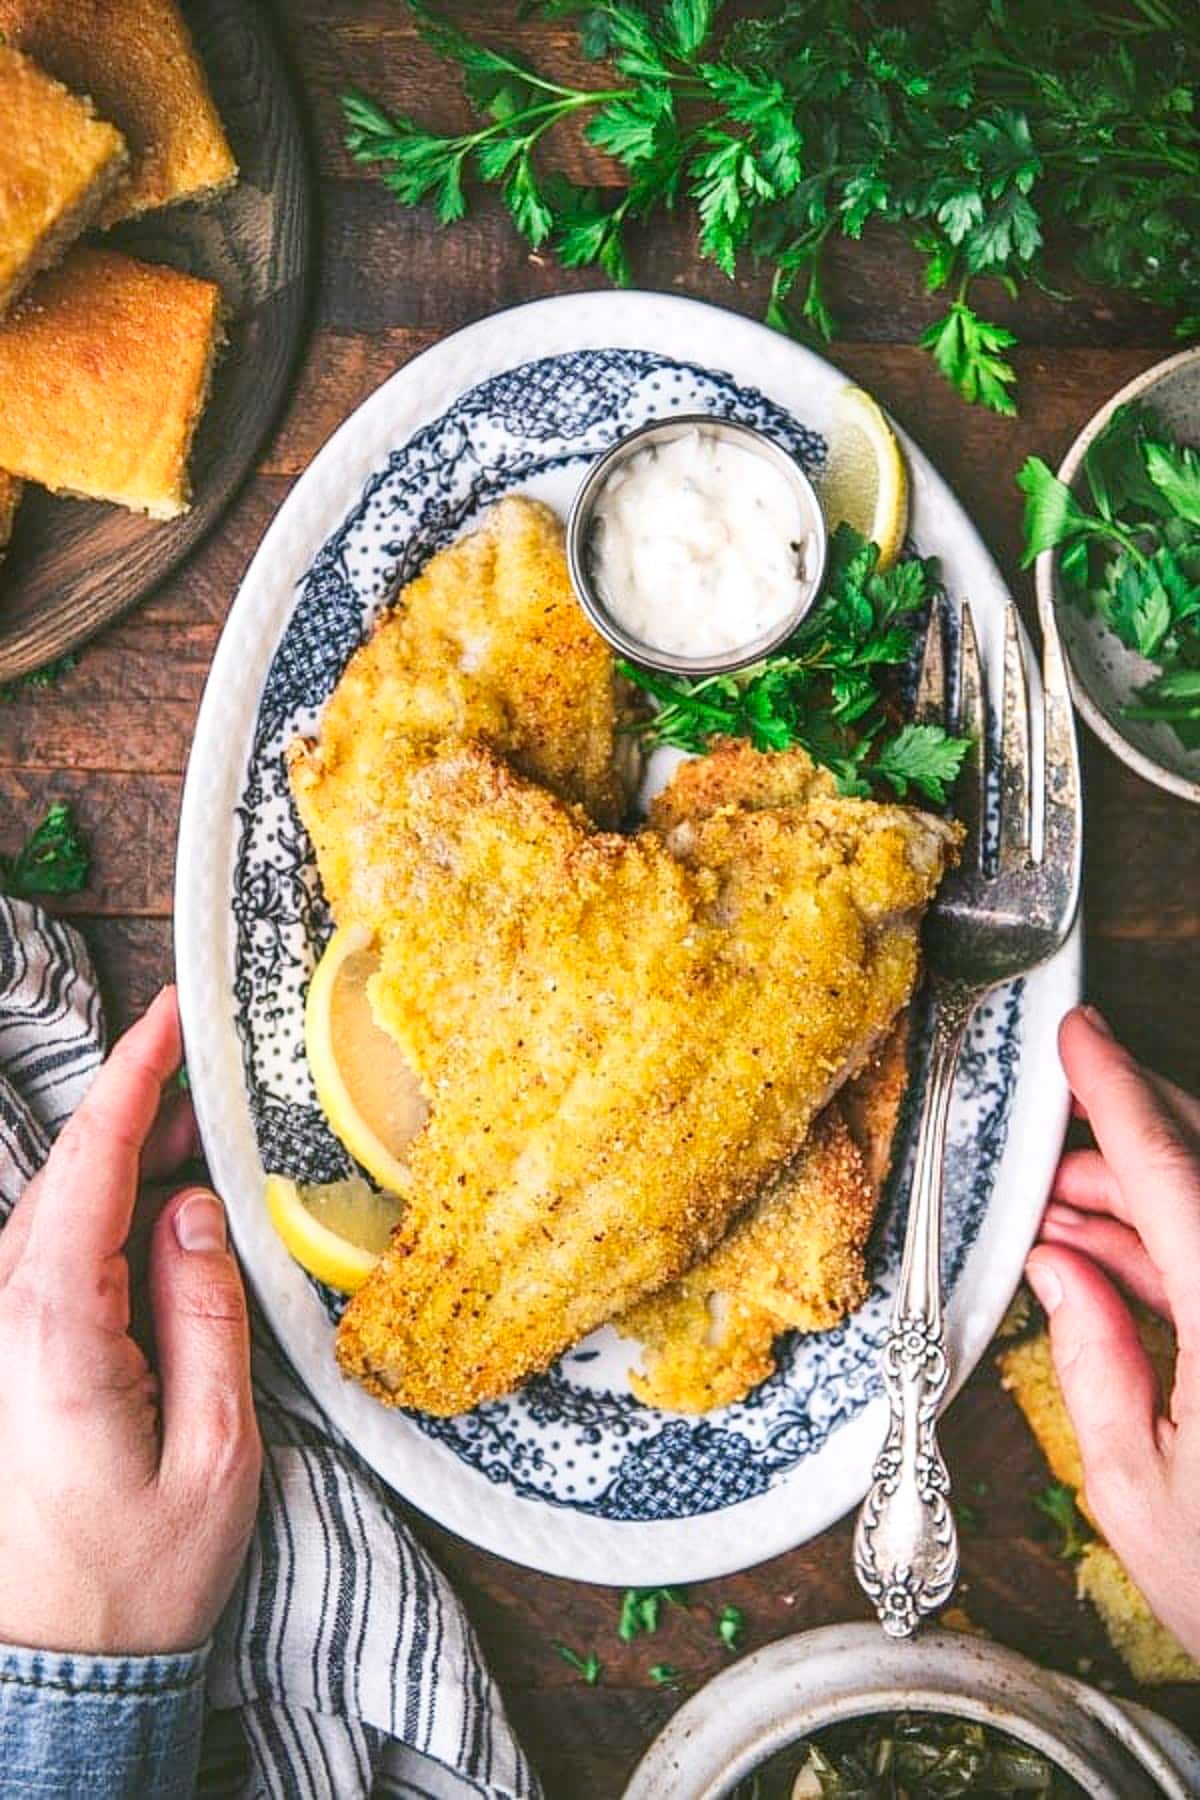 Hands serving a platter of fried catfish on a wooden table.